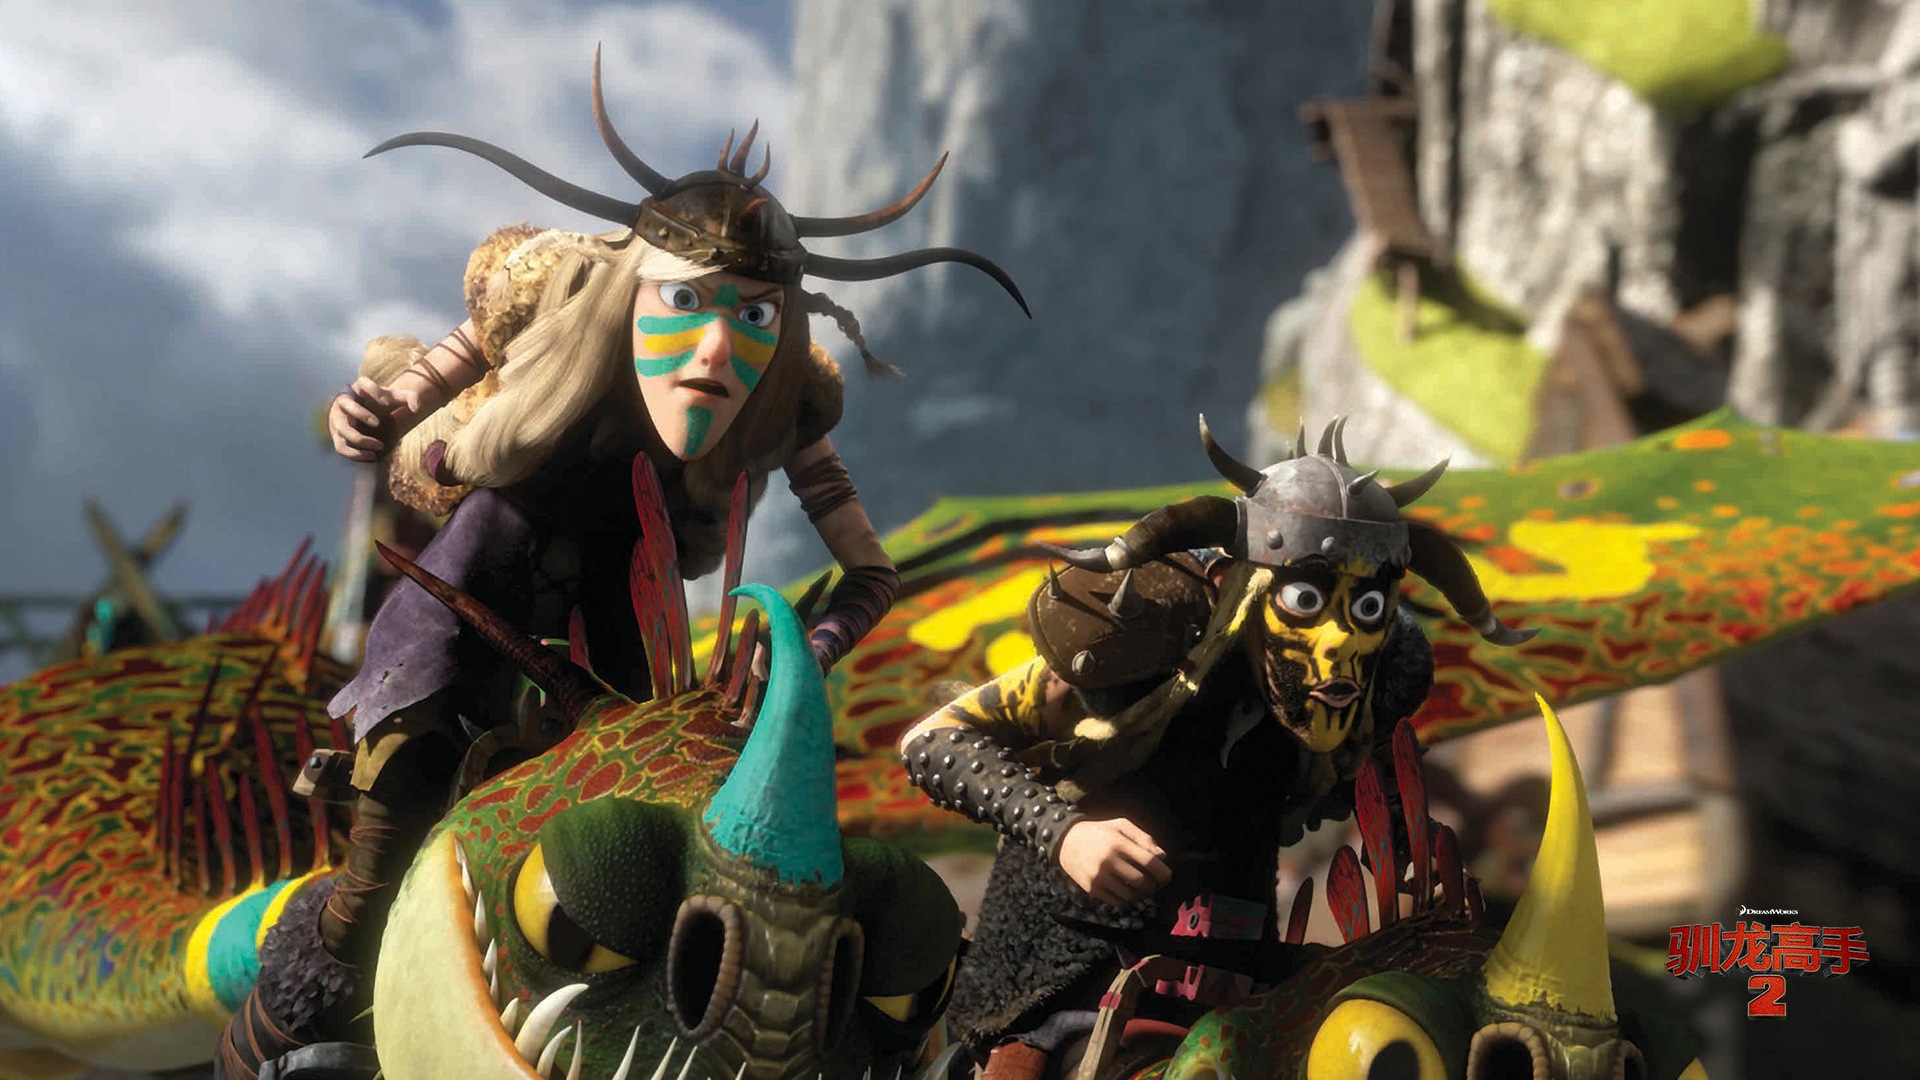 How to Train Your Dragon 2 驯龙高手2 高清壁纸13 - 1920x1080